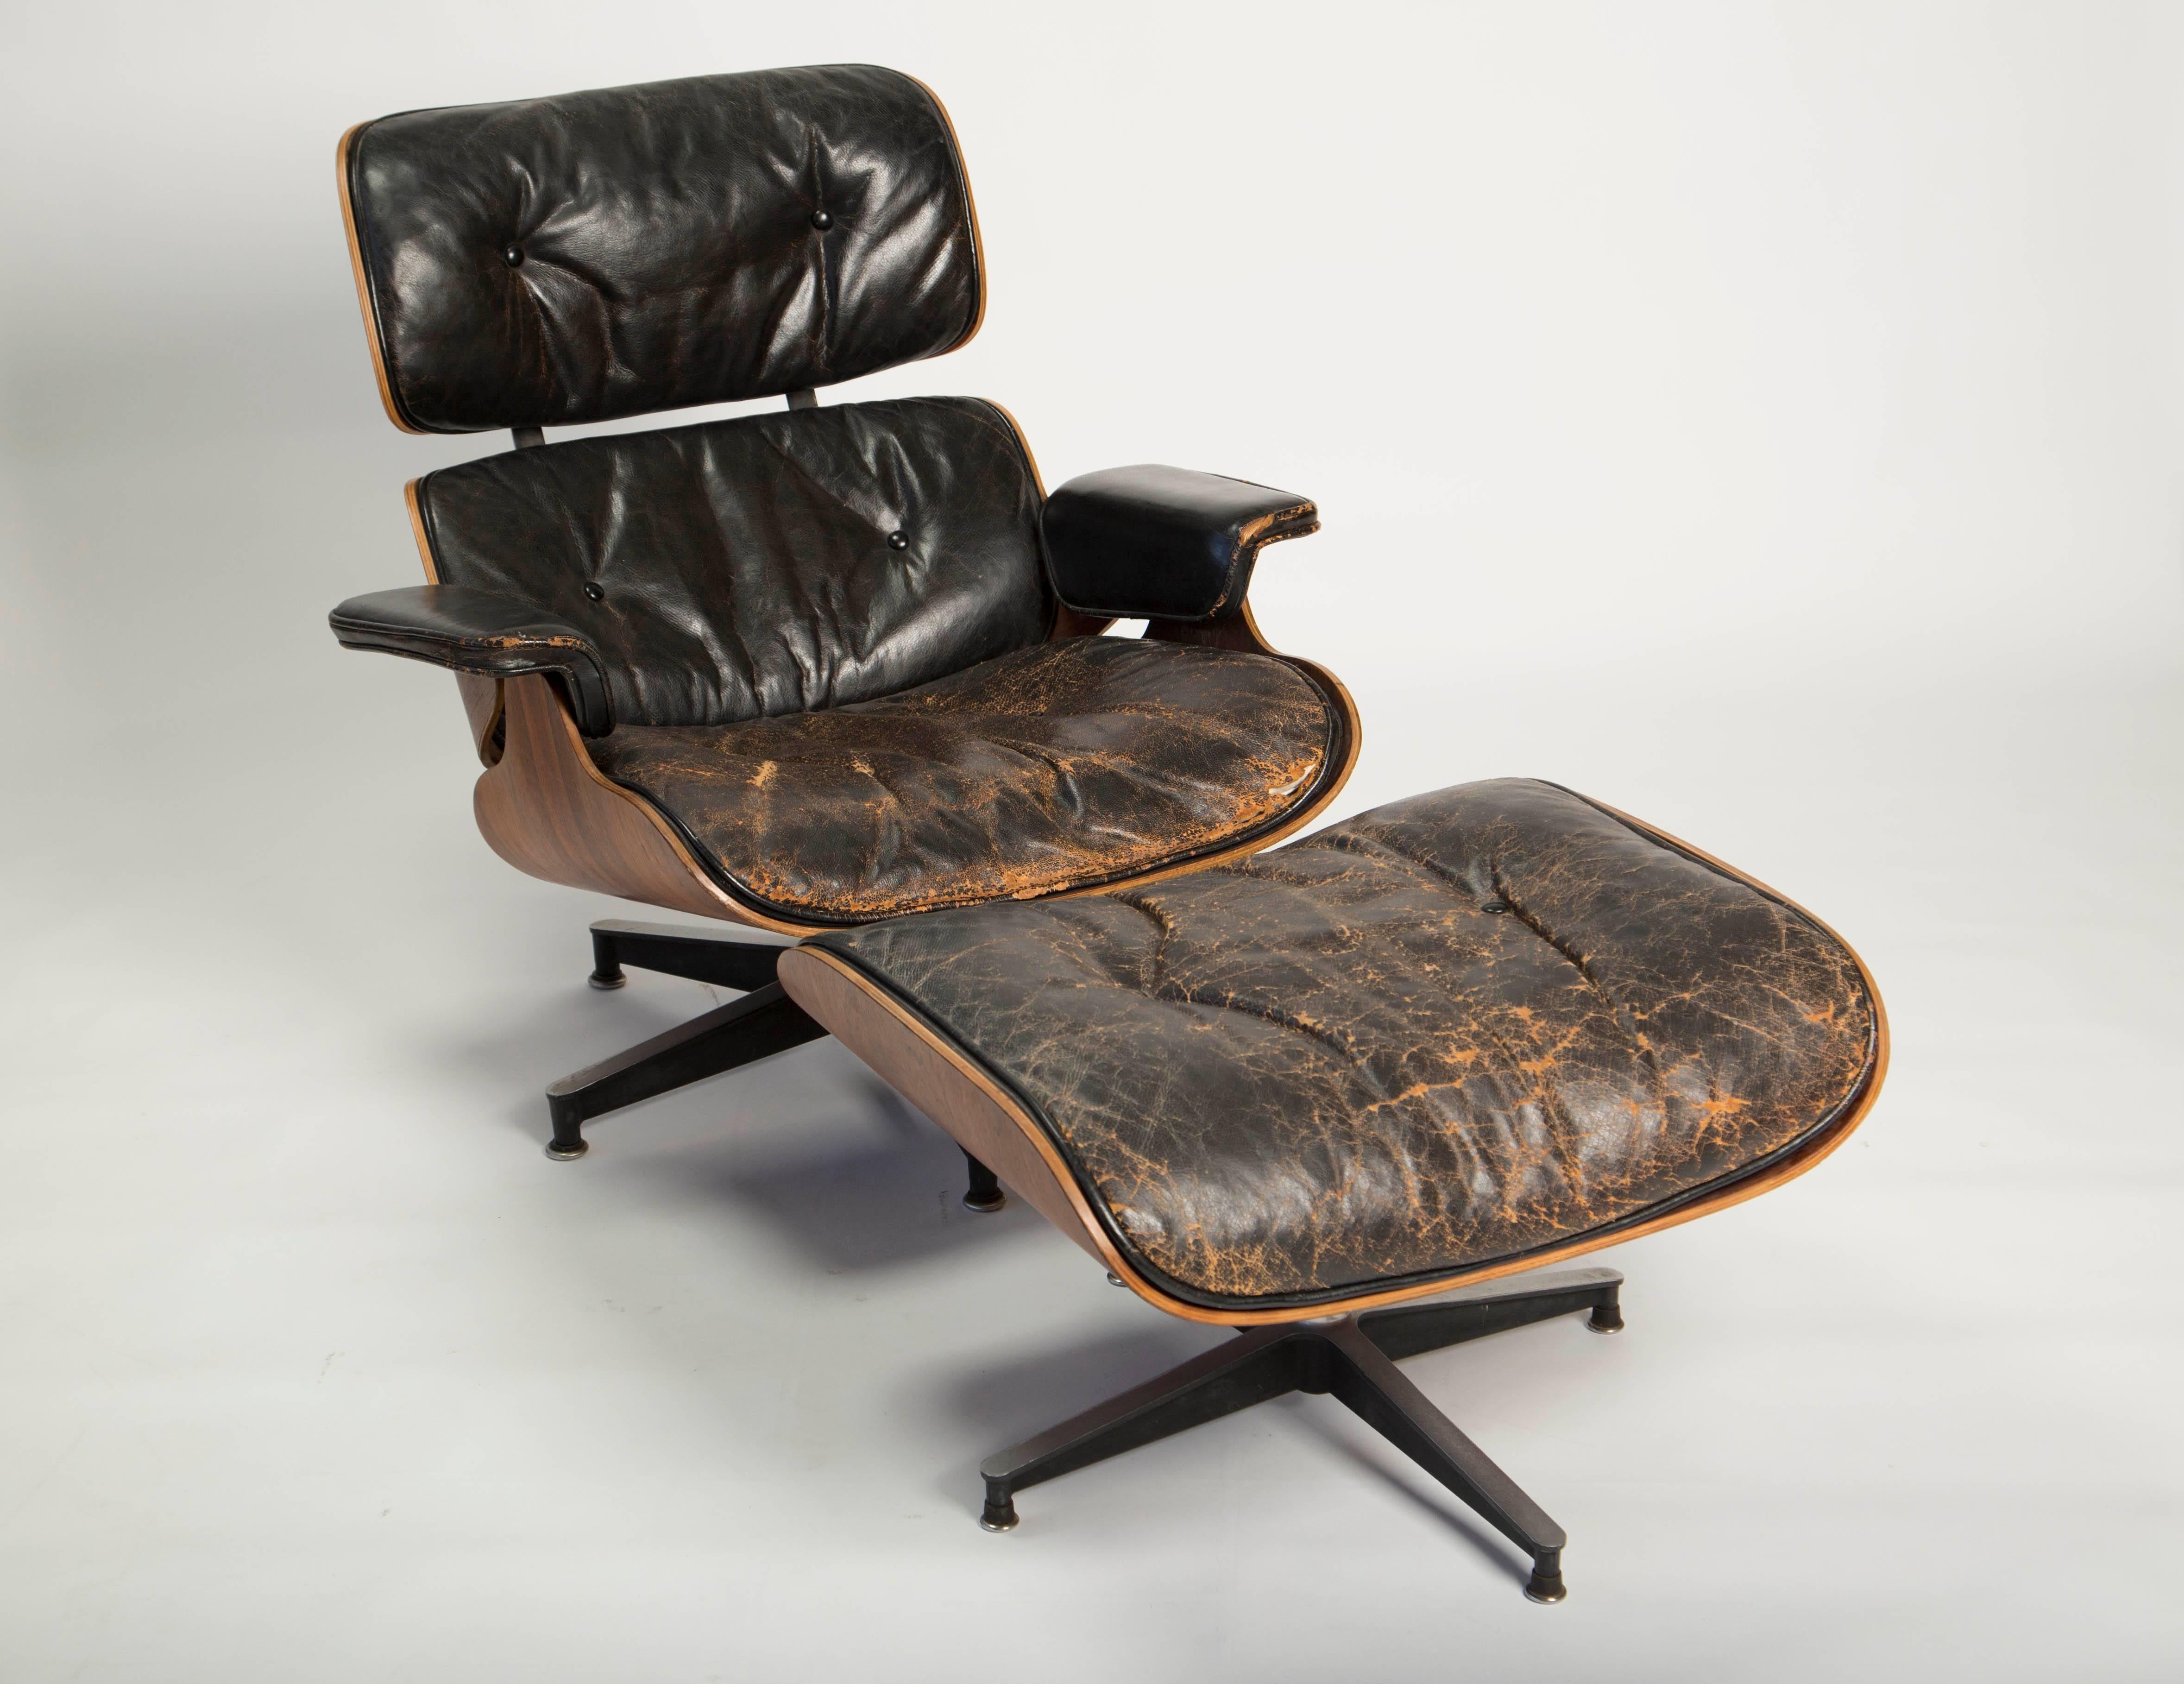 An early example of the iconic 670/671 lounge chair by Charles & Ray Eames and produced by Herman Miller. This example has a fully rotating ottoman with push-on glides, a testament to its early provenance. Only a few of the first lounge chairs